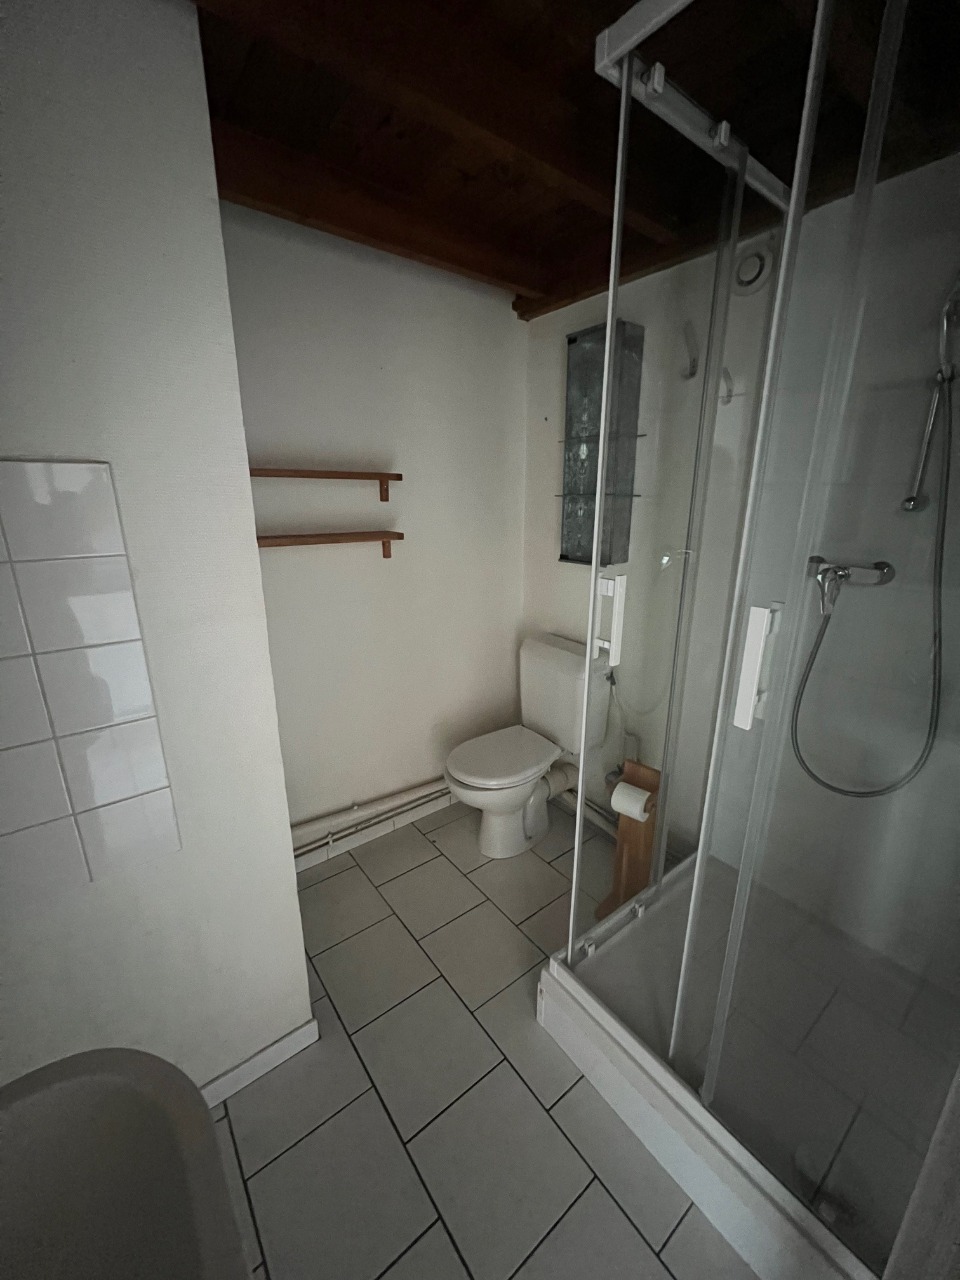 Appartement type 1 bis lille Photo 7 - JLW Immobilier